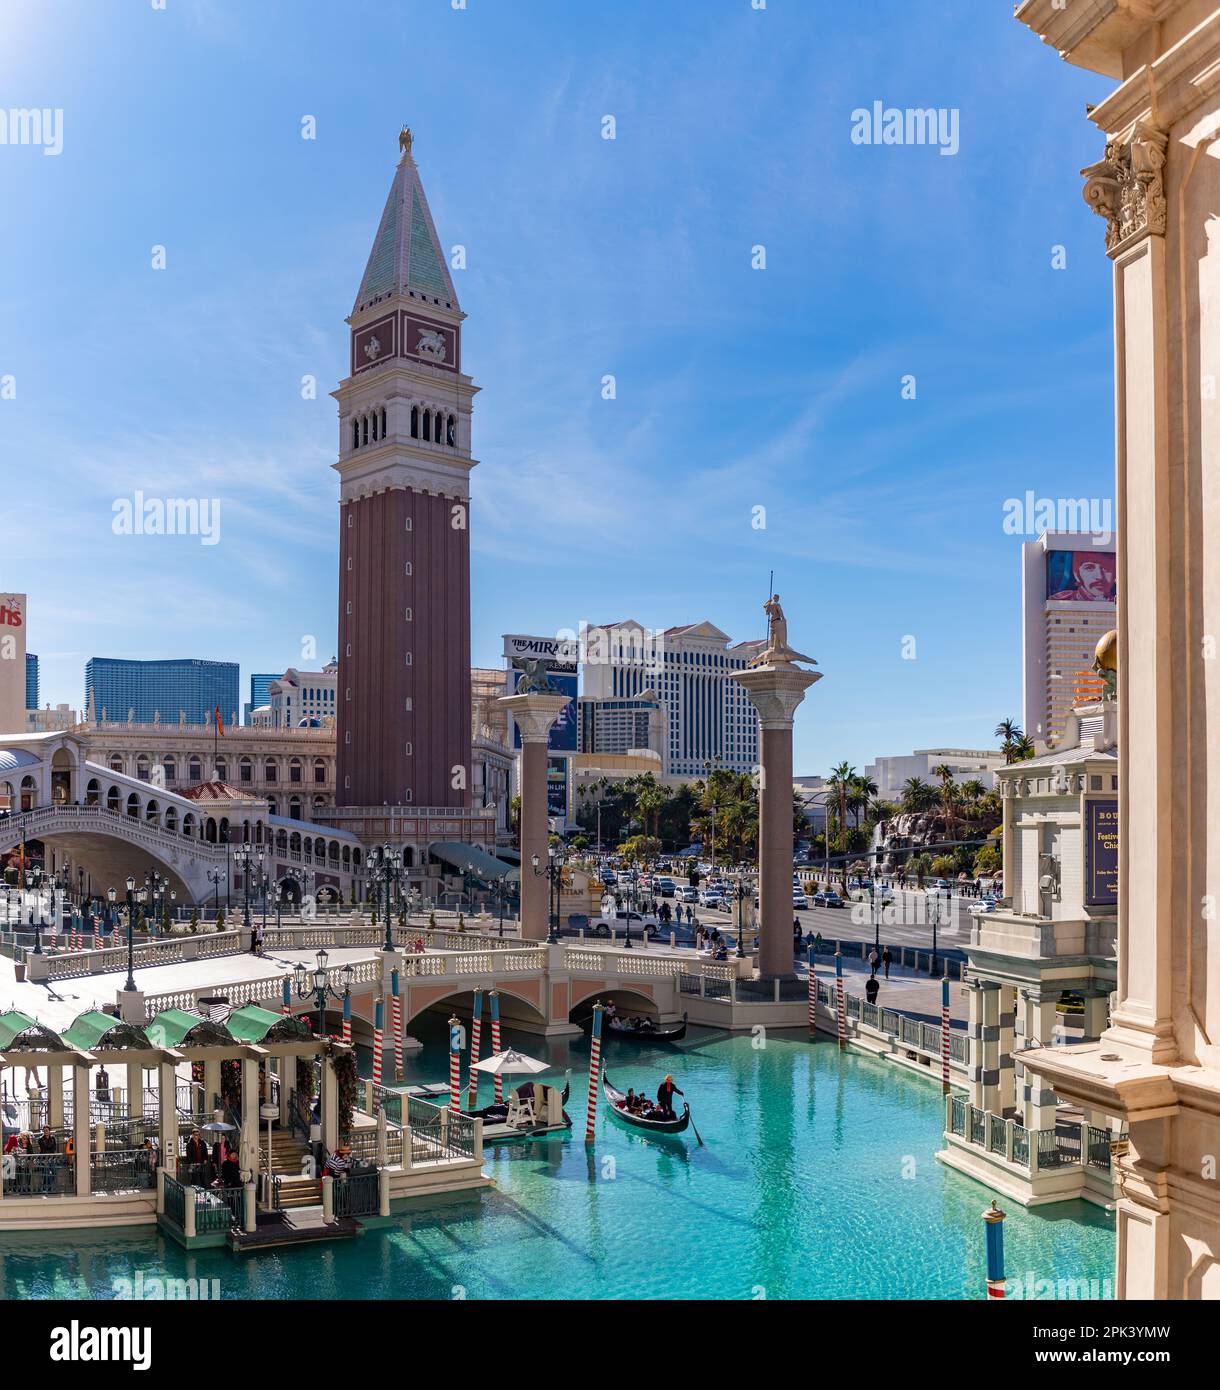 A picture of the Venetian Las Vegas, with the Campanile Tower on the left  Stock Photo - Alamy